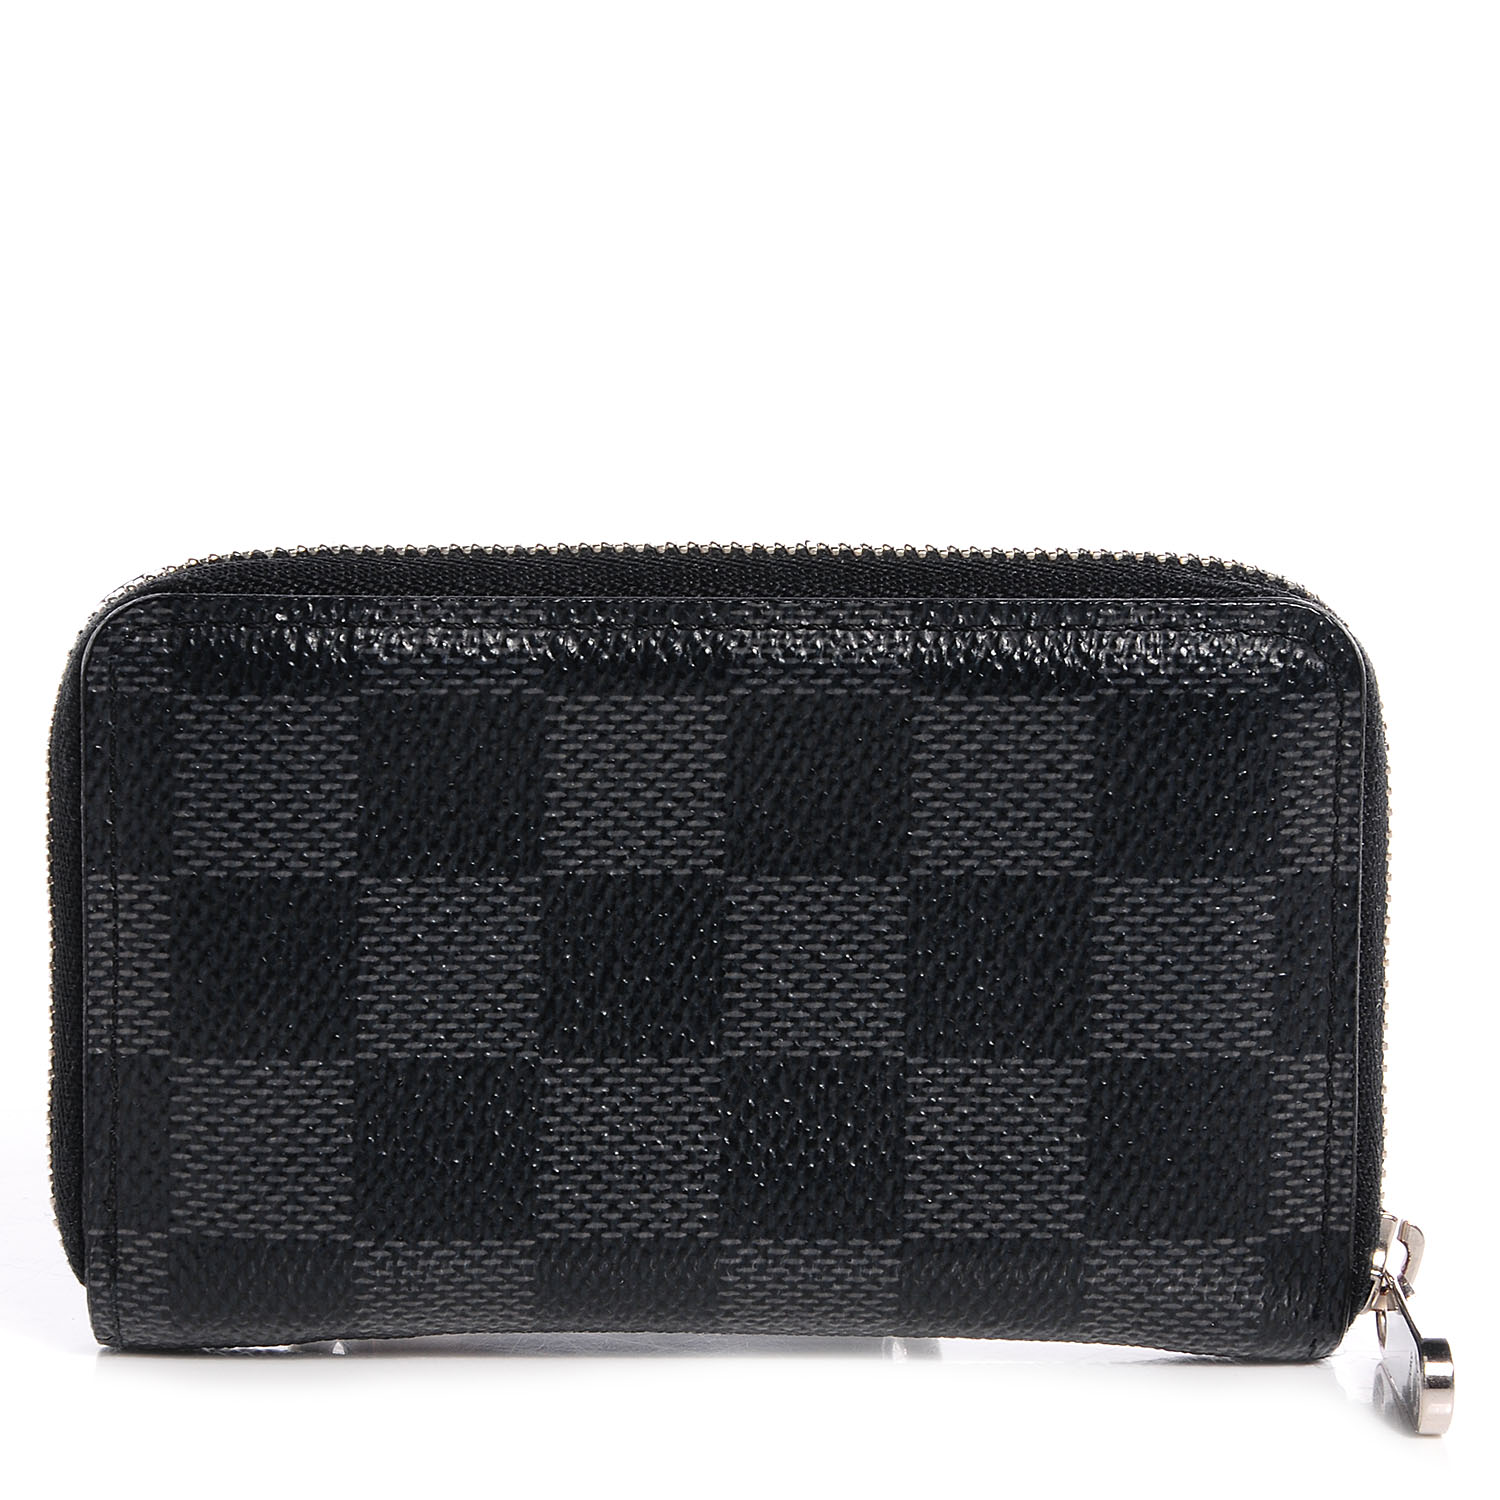 Lv Black Coin Purse  Natural Resource Department